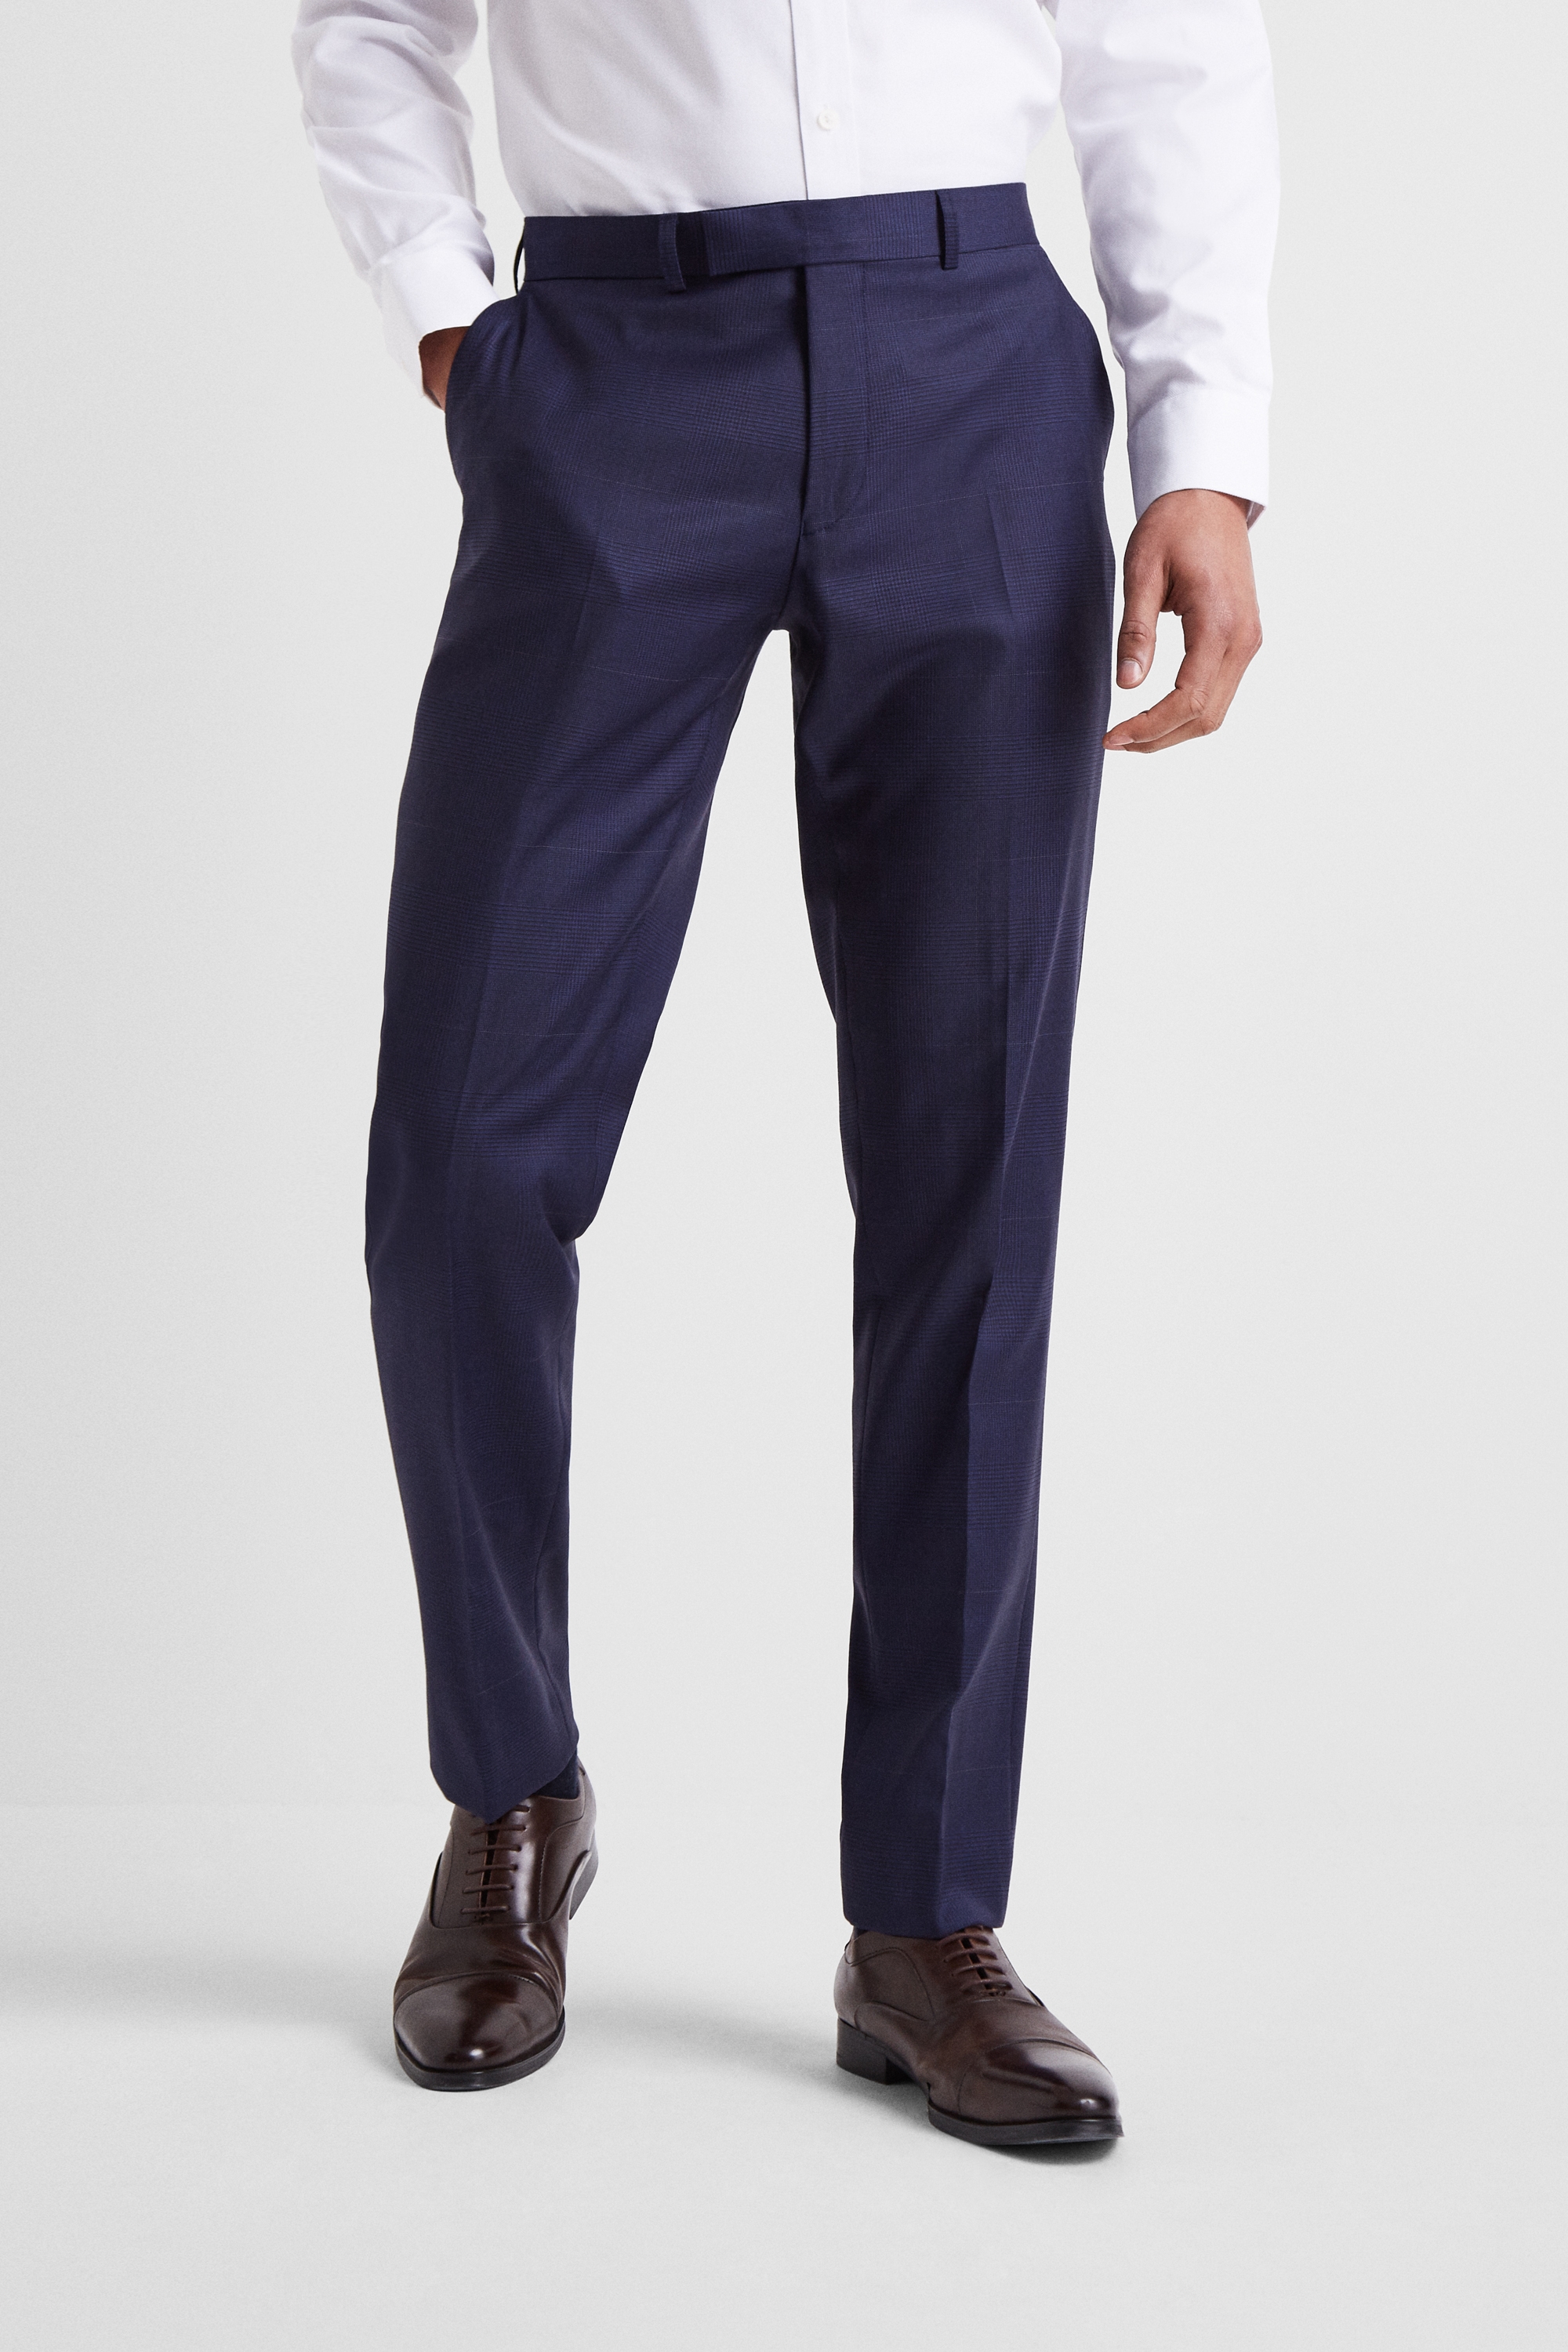 Moss 1851 Tailored Fit Subtle Blue CheckTrousers